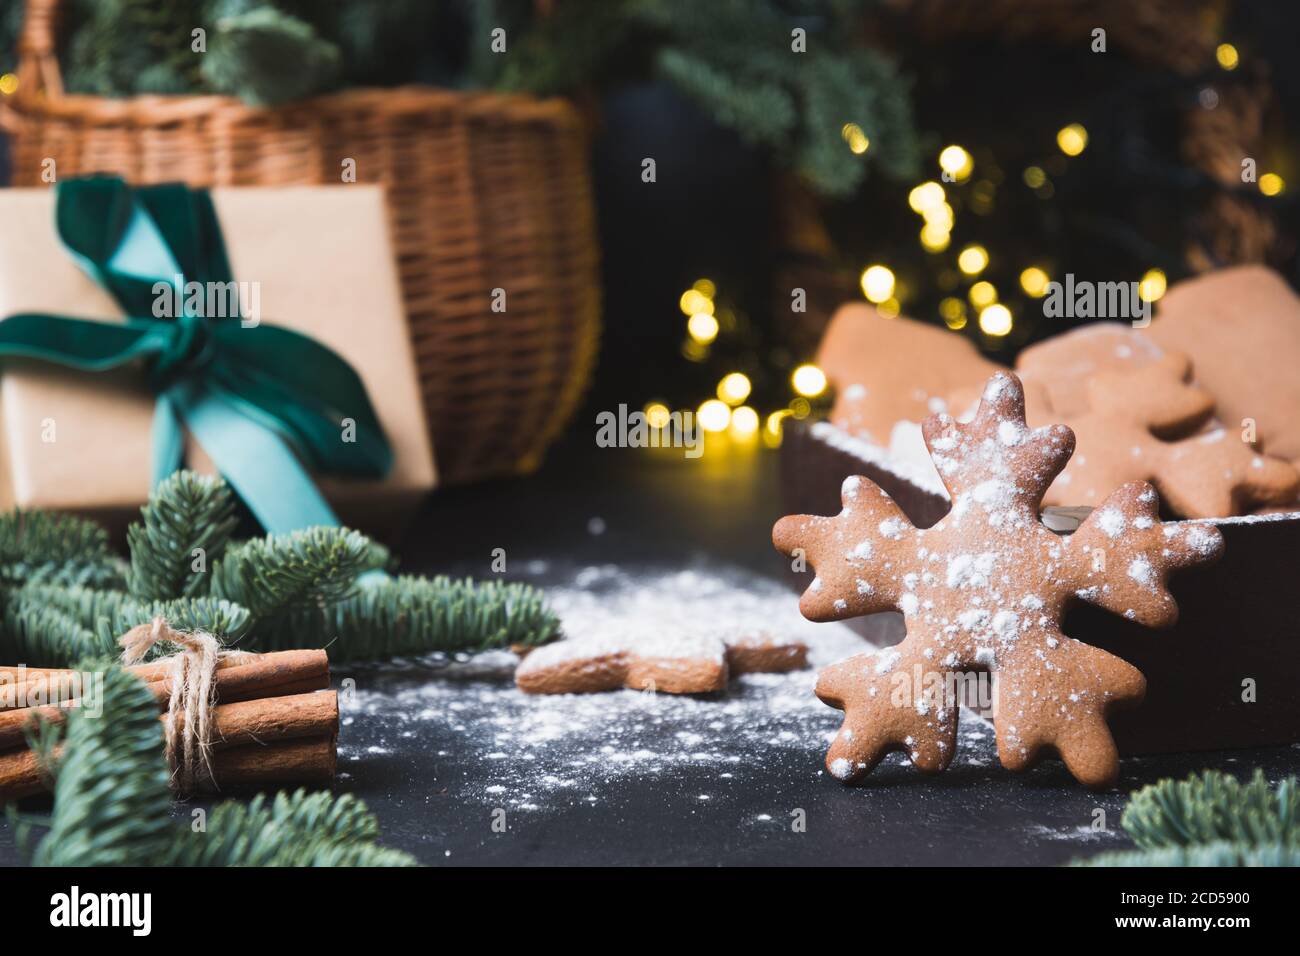 https://c8.alamy.com/comp/2CD5900/holiday-composition-of-tasty-homemade-cookies-gift-hamper-gift-and-garland-on-black-2CD5900.jpg